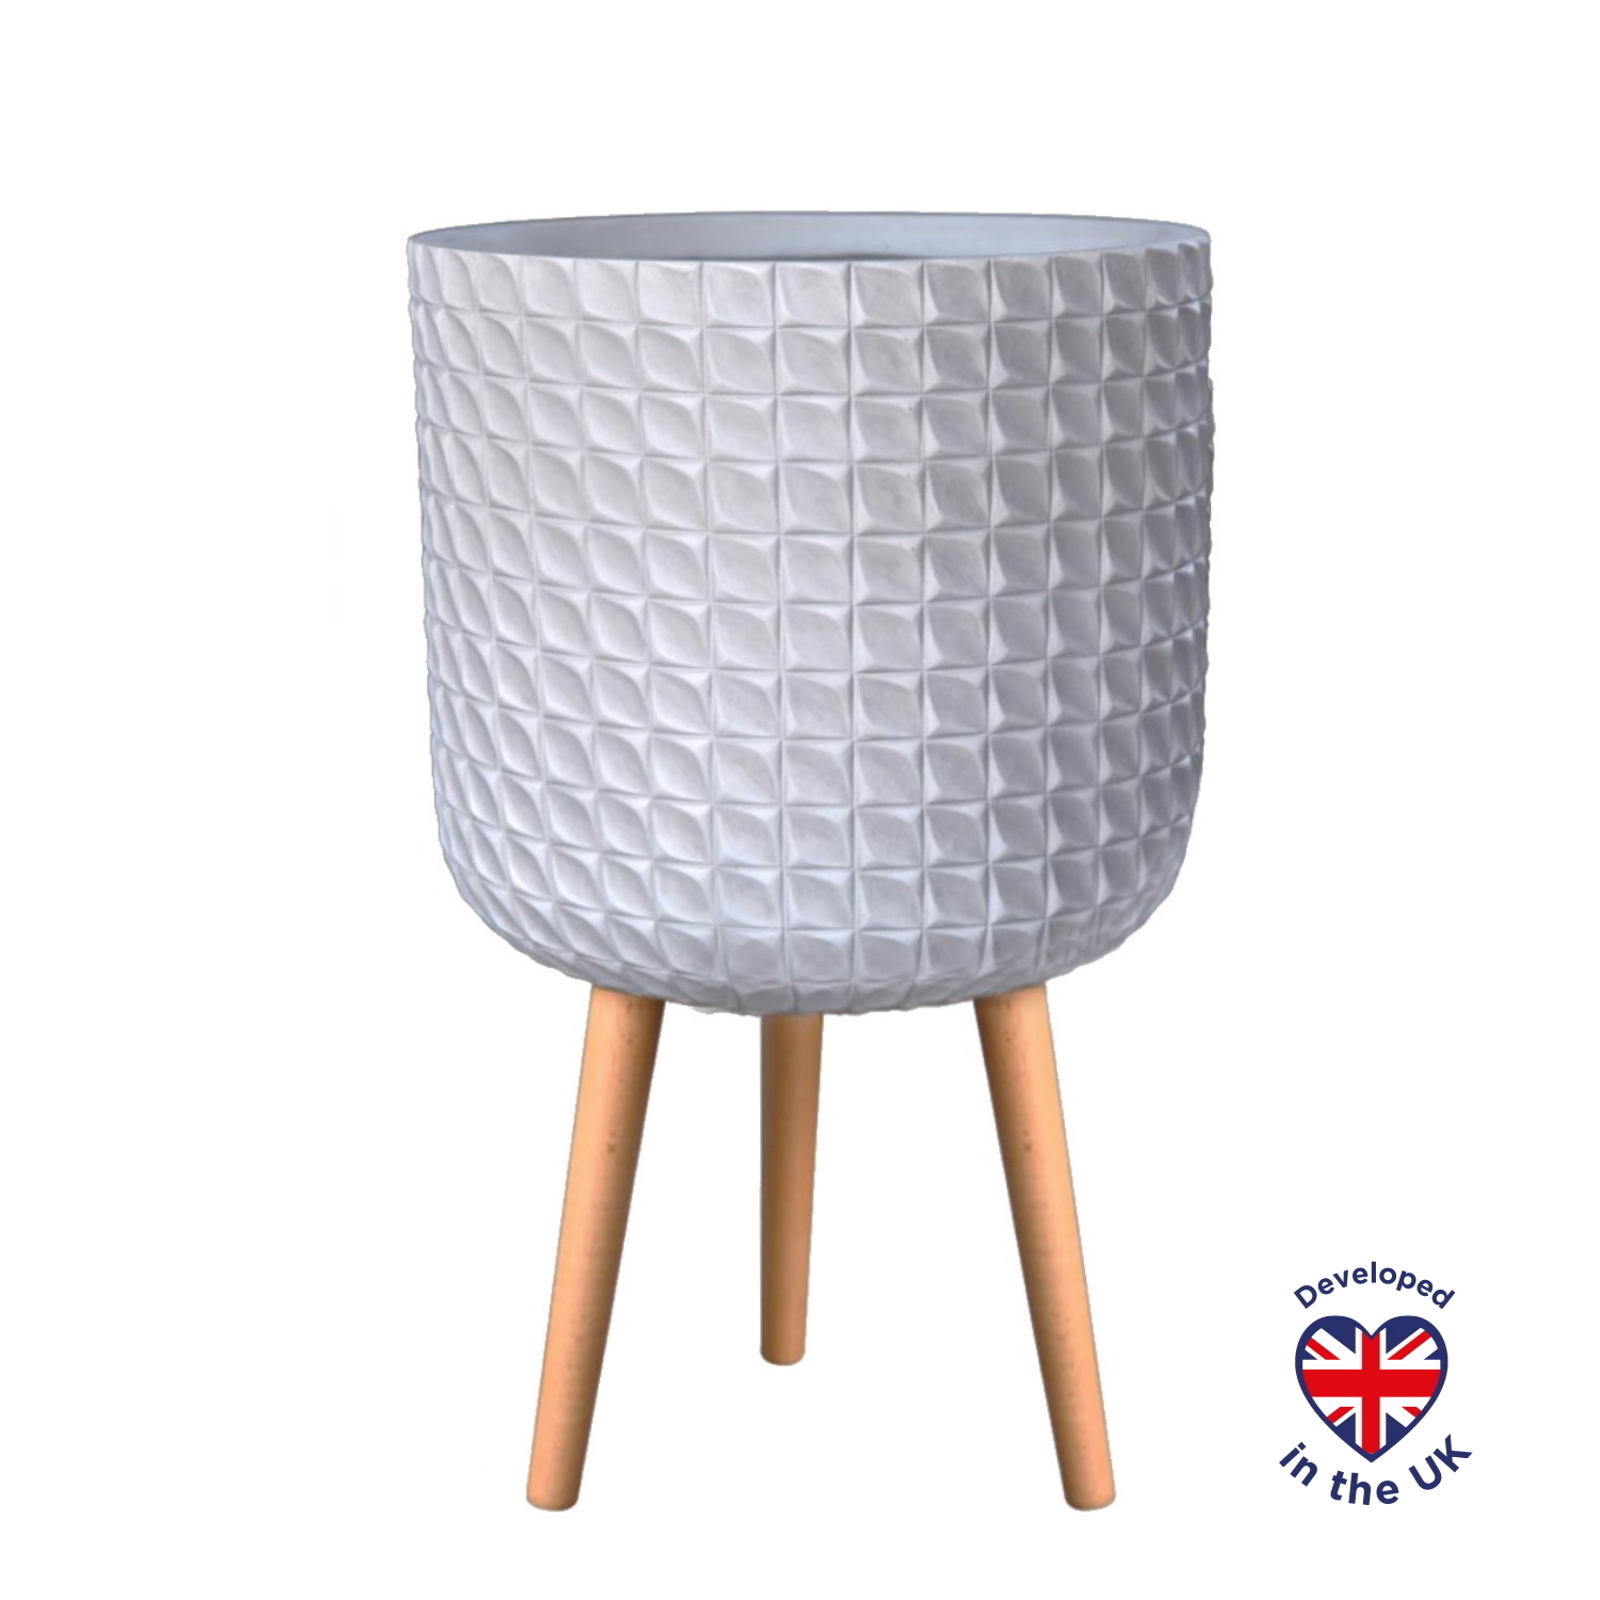 Geometric Patterned White Cylinder Indoor Planter with Legs D37 H62 cm, 32.7 ltrs Cap.